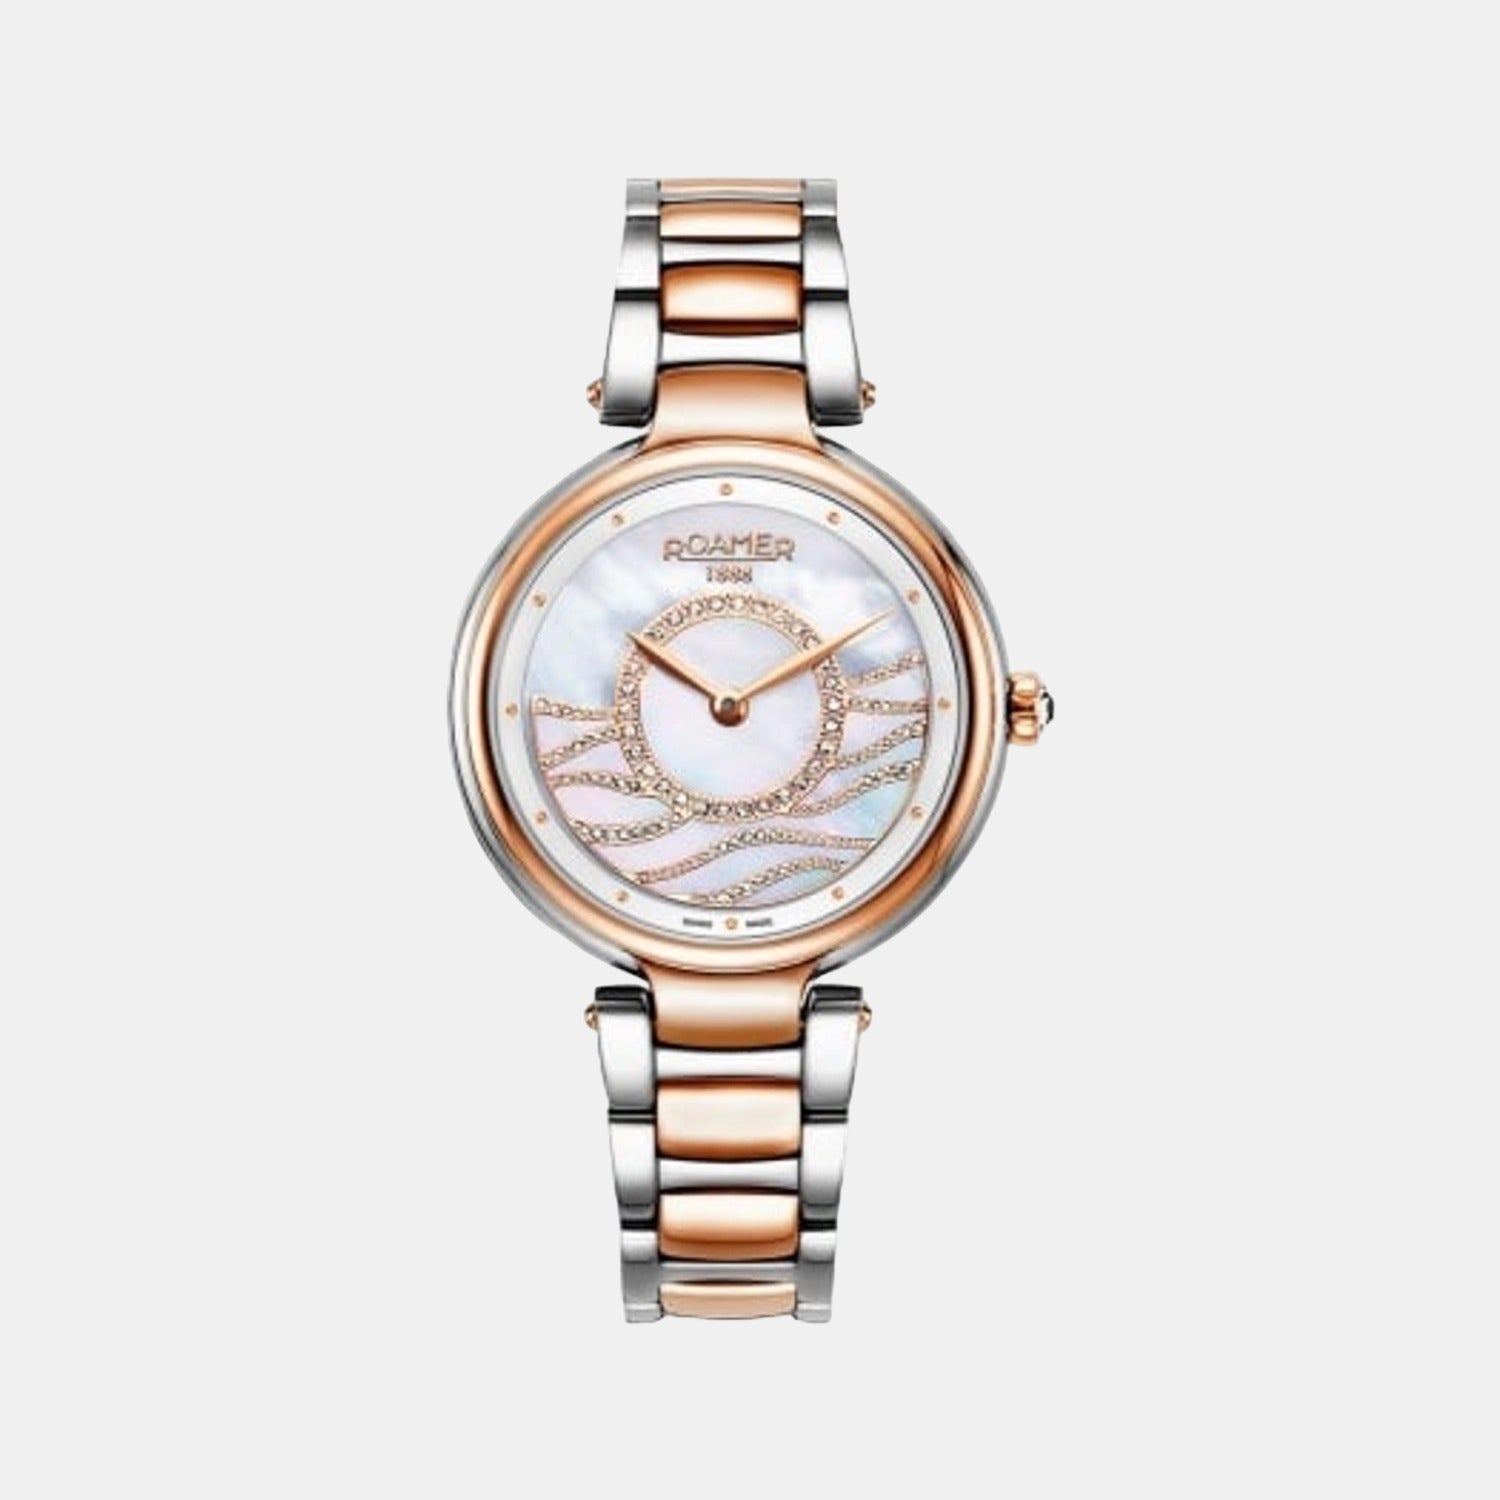 Female White Analog Stainless Steel Watch 600857 49 15 50